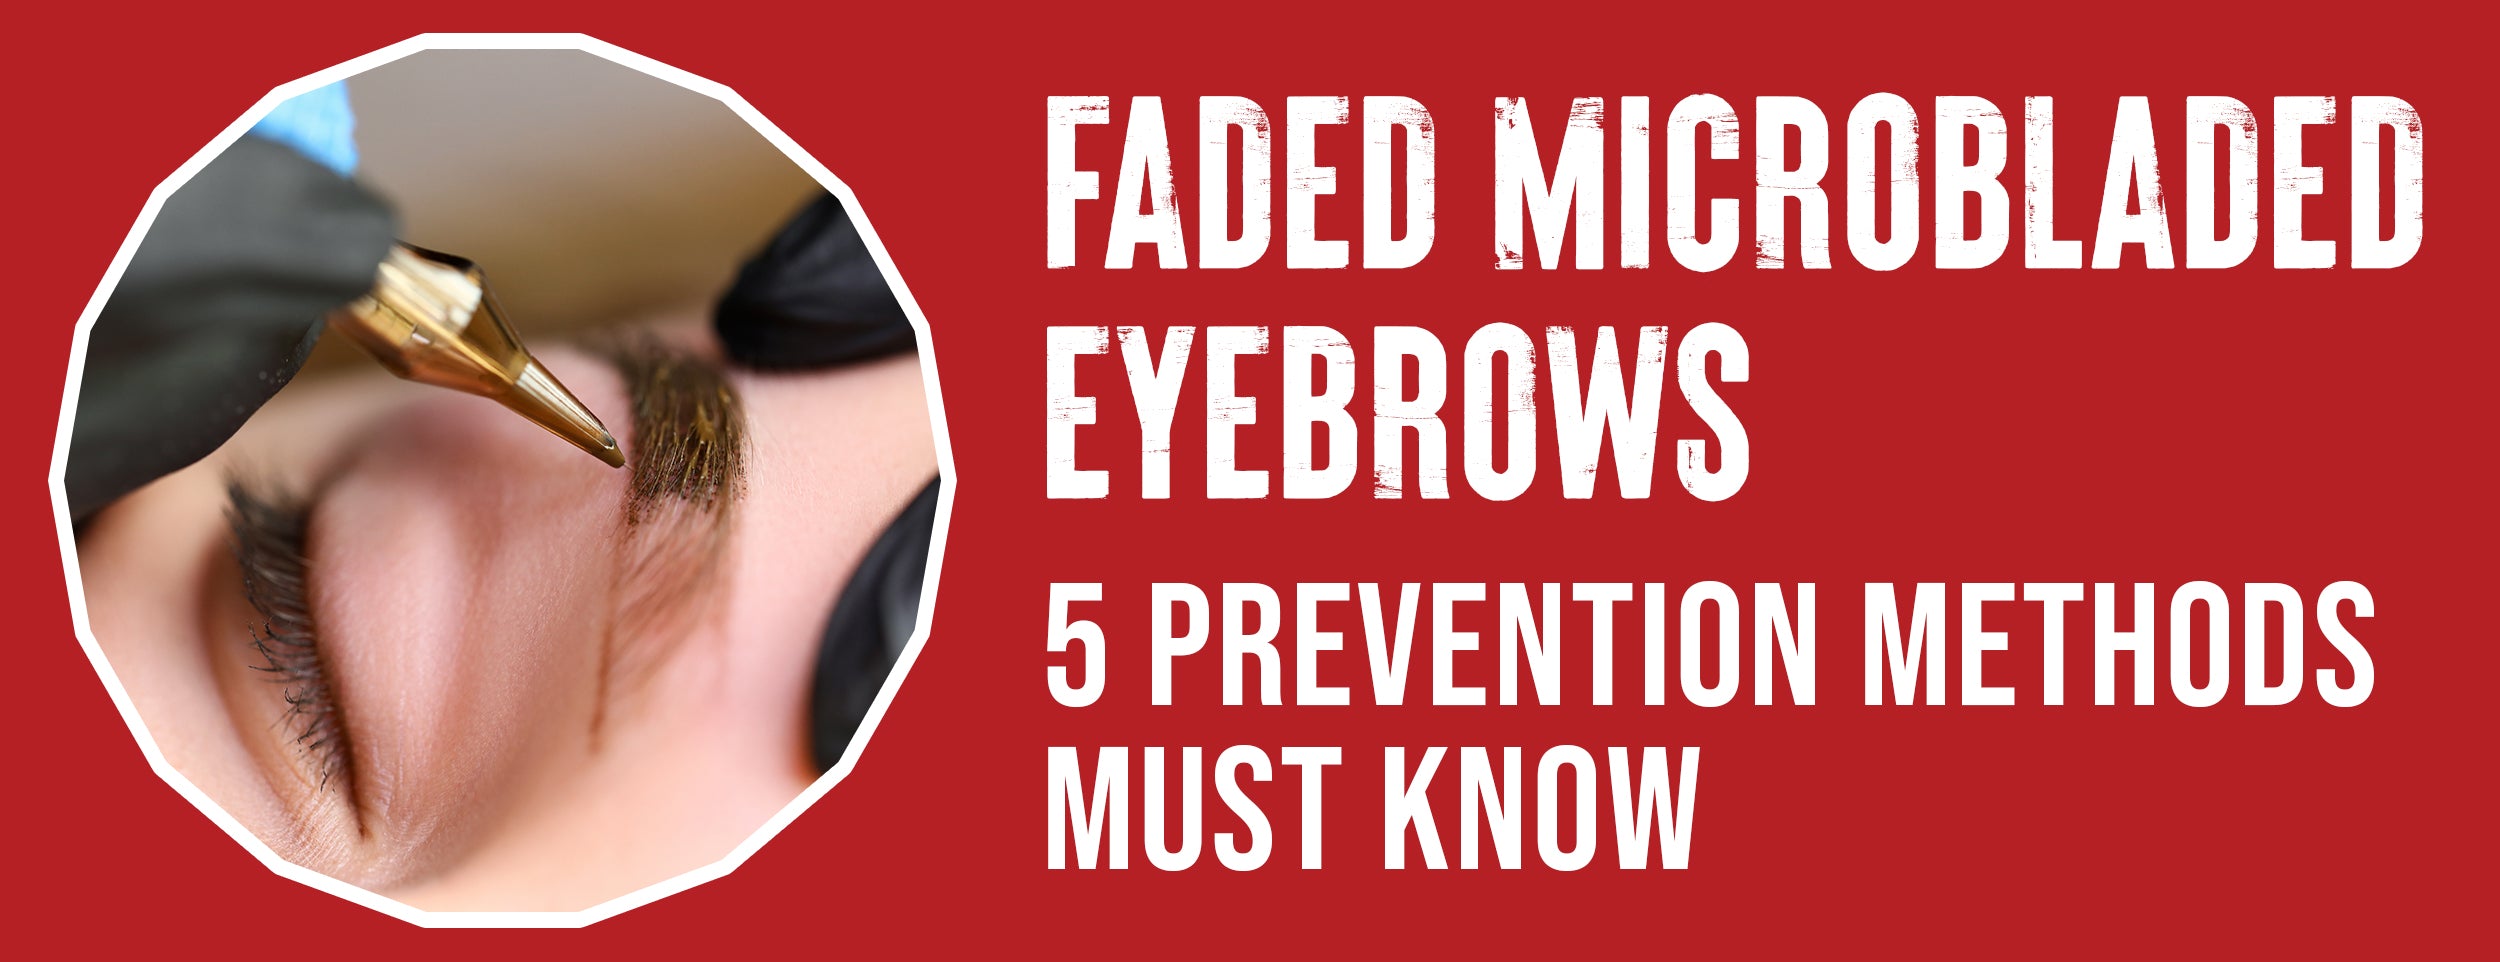 Guide To Fading Microbladed Eyebrows